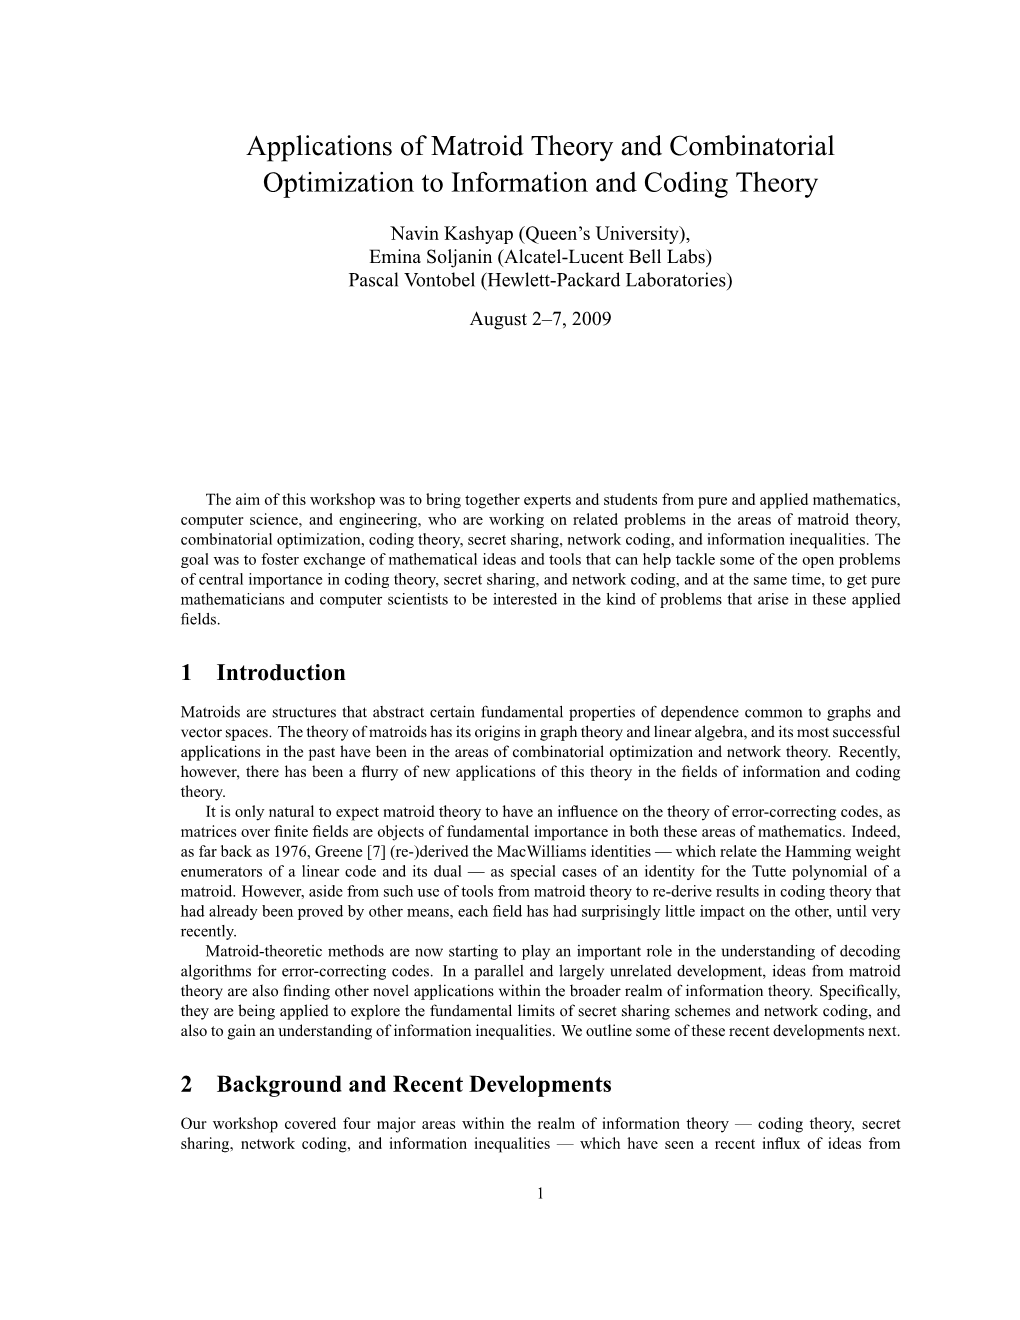 Applications of Matroid Theory and Combinatorial Optimization to Information and Coding Theory